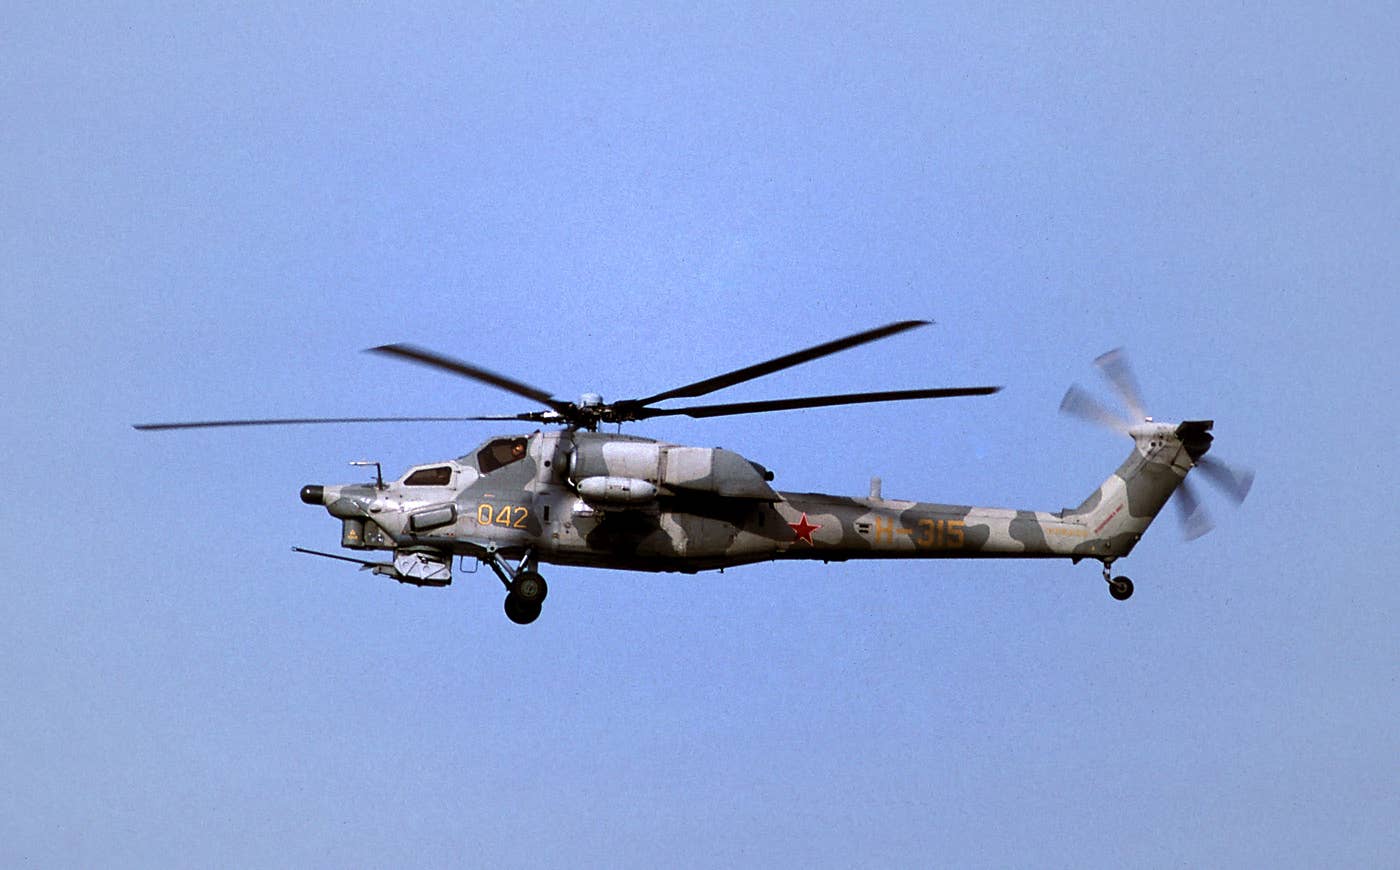 First flown in 1988, the slightly improved Mi-28A added a new X-type tail rotor, redesigned engine exhausts, improved sensors, and self-defense devices. It was abandoned in favor of the night-capable Mi-28N. <em>Rob Schleiffert/Wikimedia Commons</em>